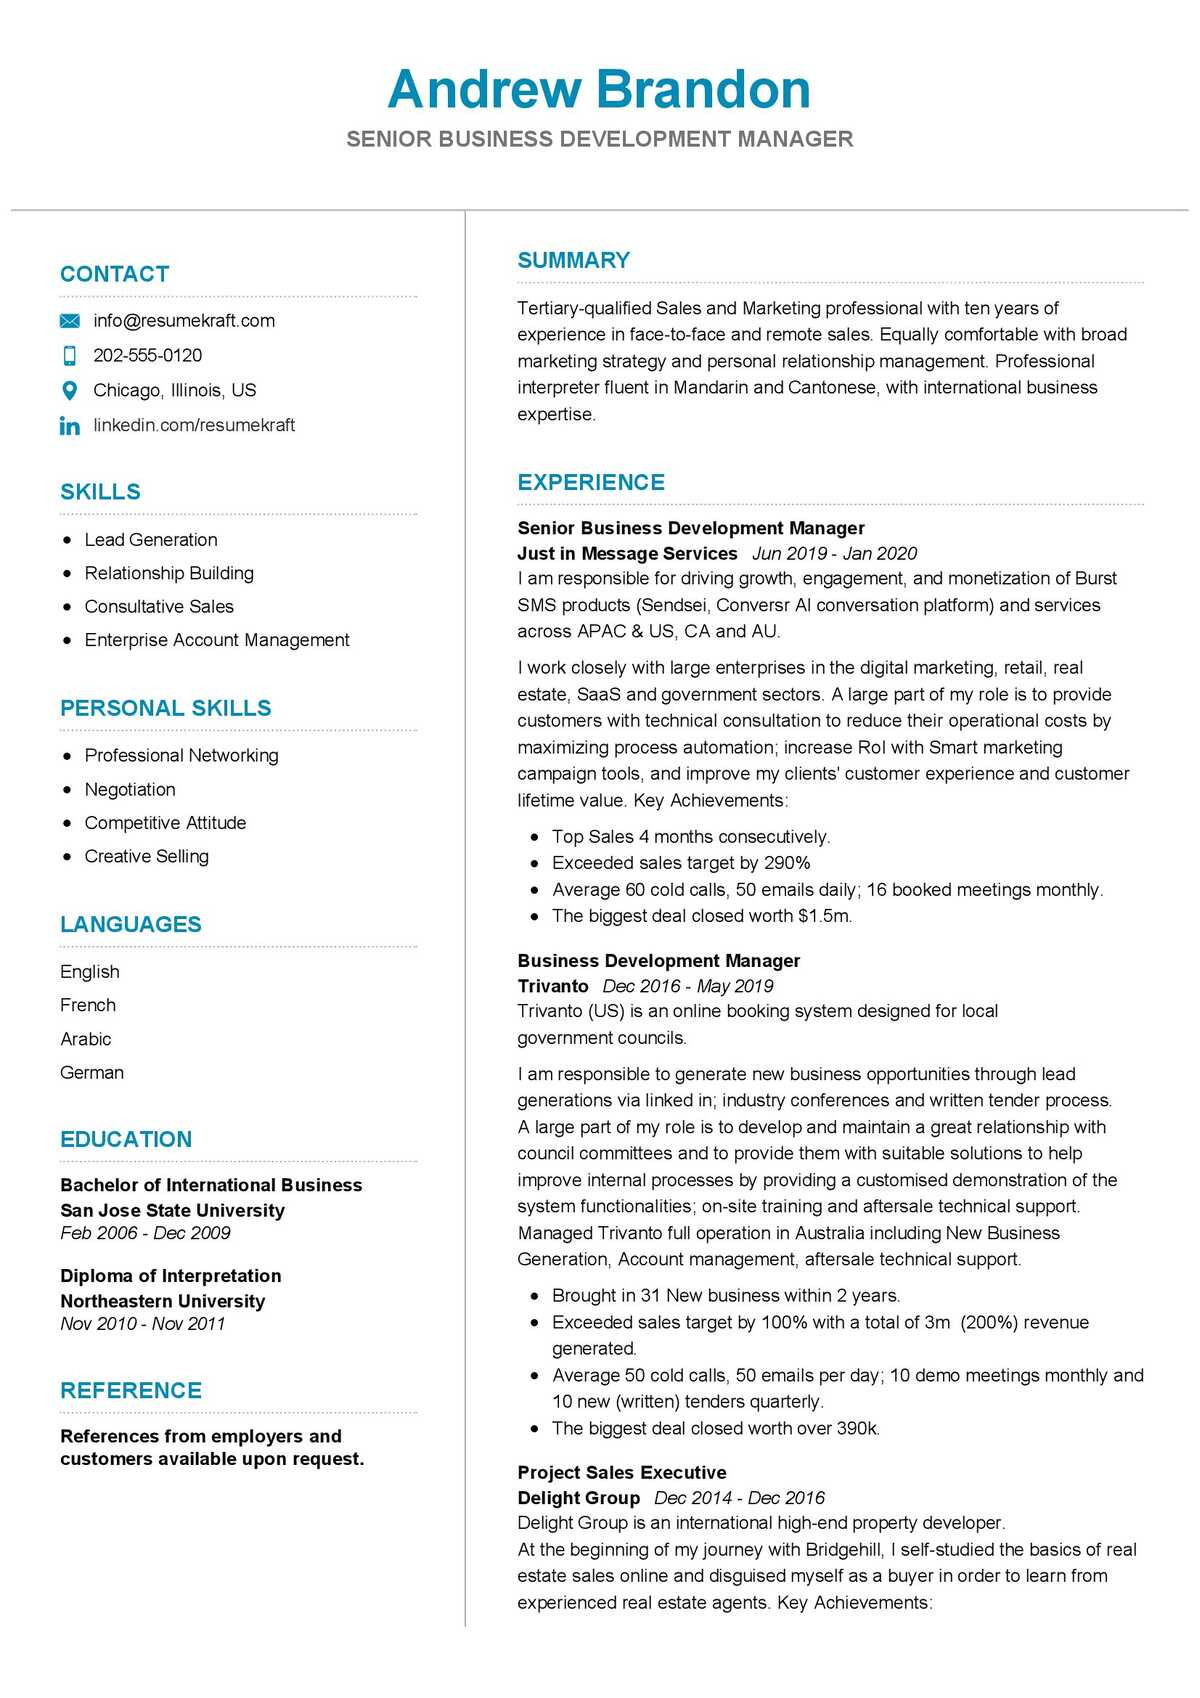 Sample Resume for Experienced Business Development Executive Senior Business Development Manager Resume Sample 2022 Writing …